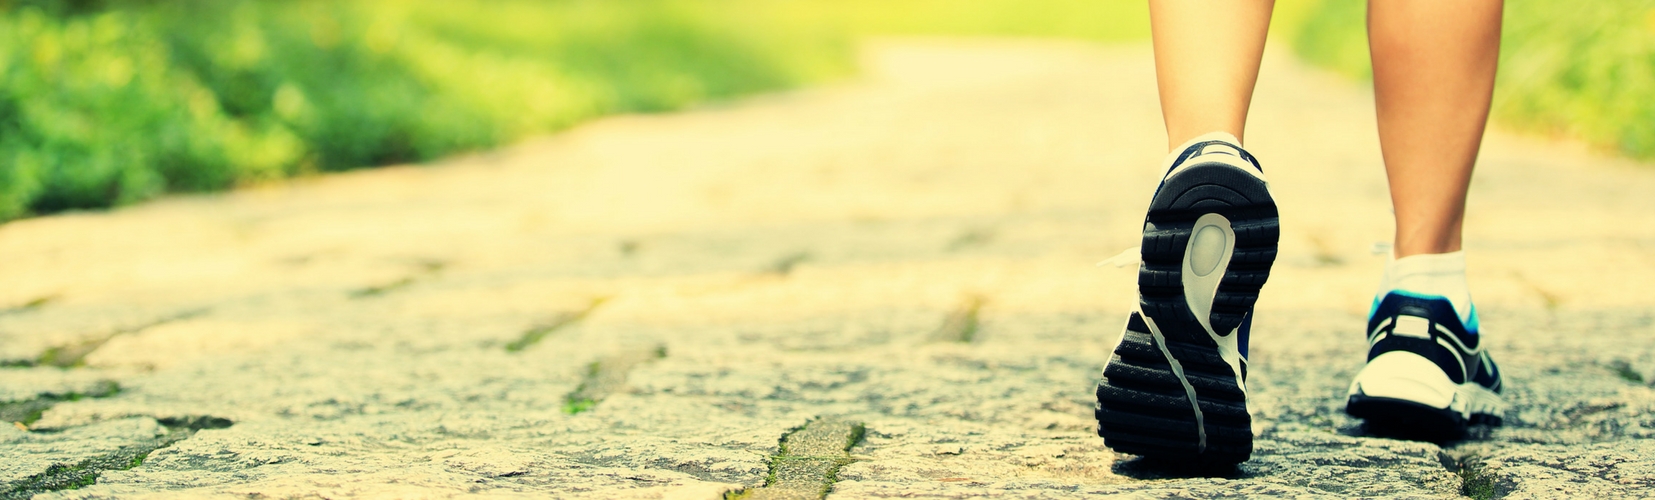 close up photo of a person's feet running along a path